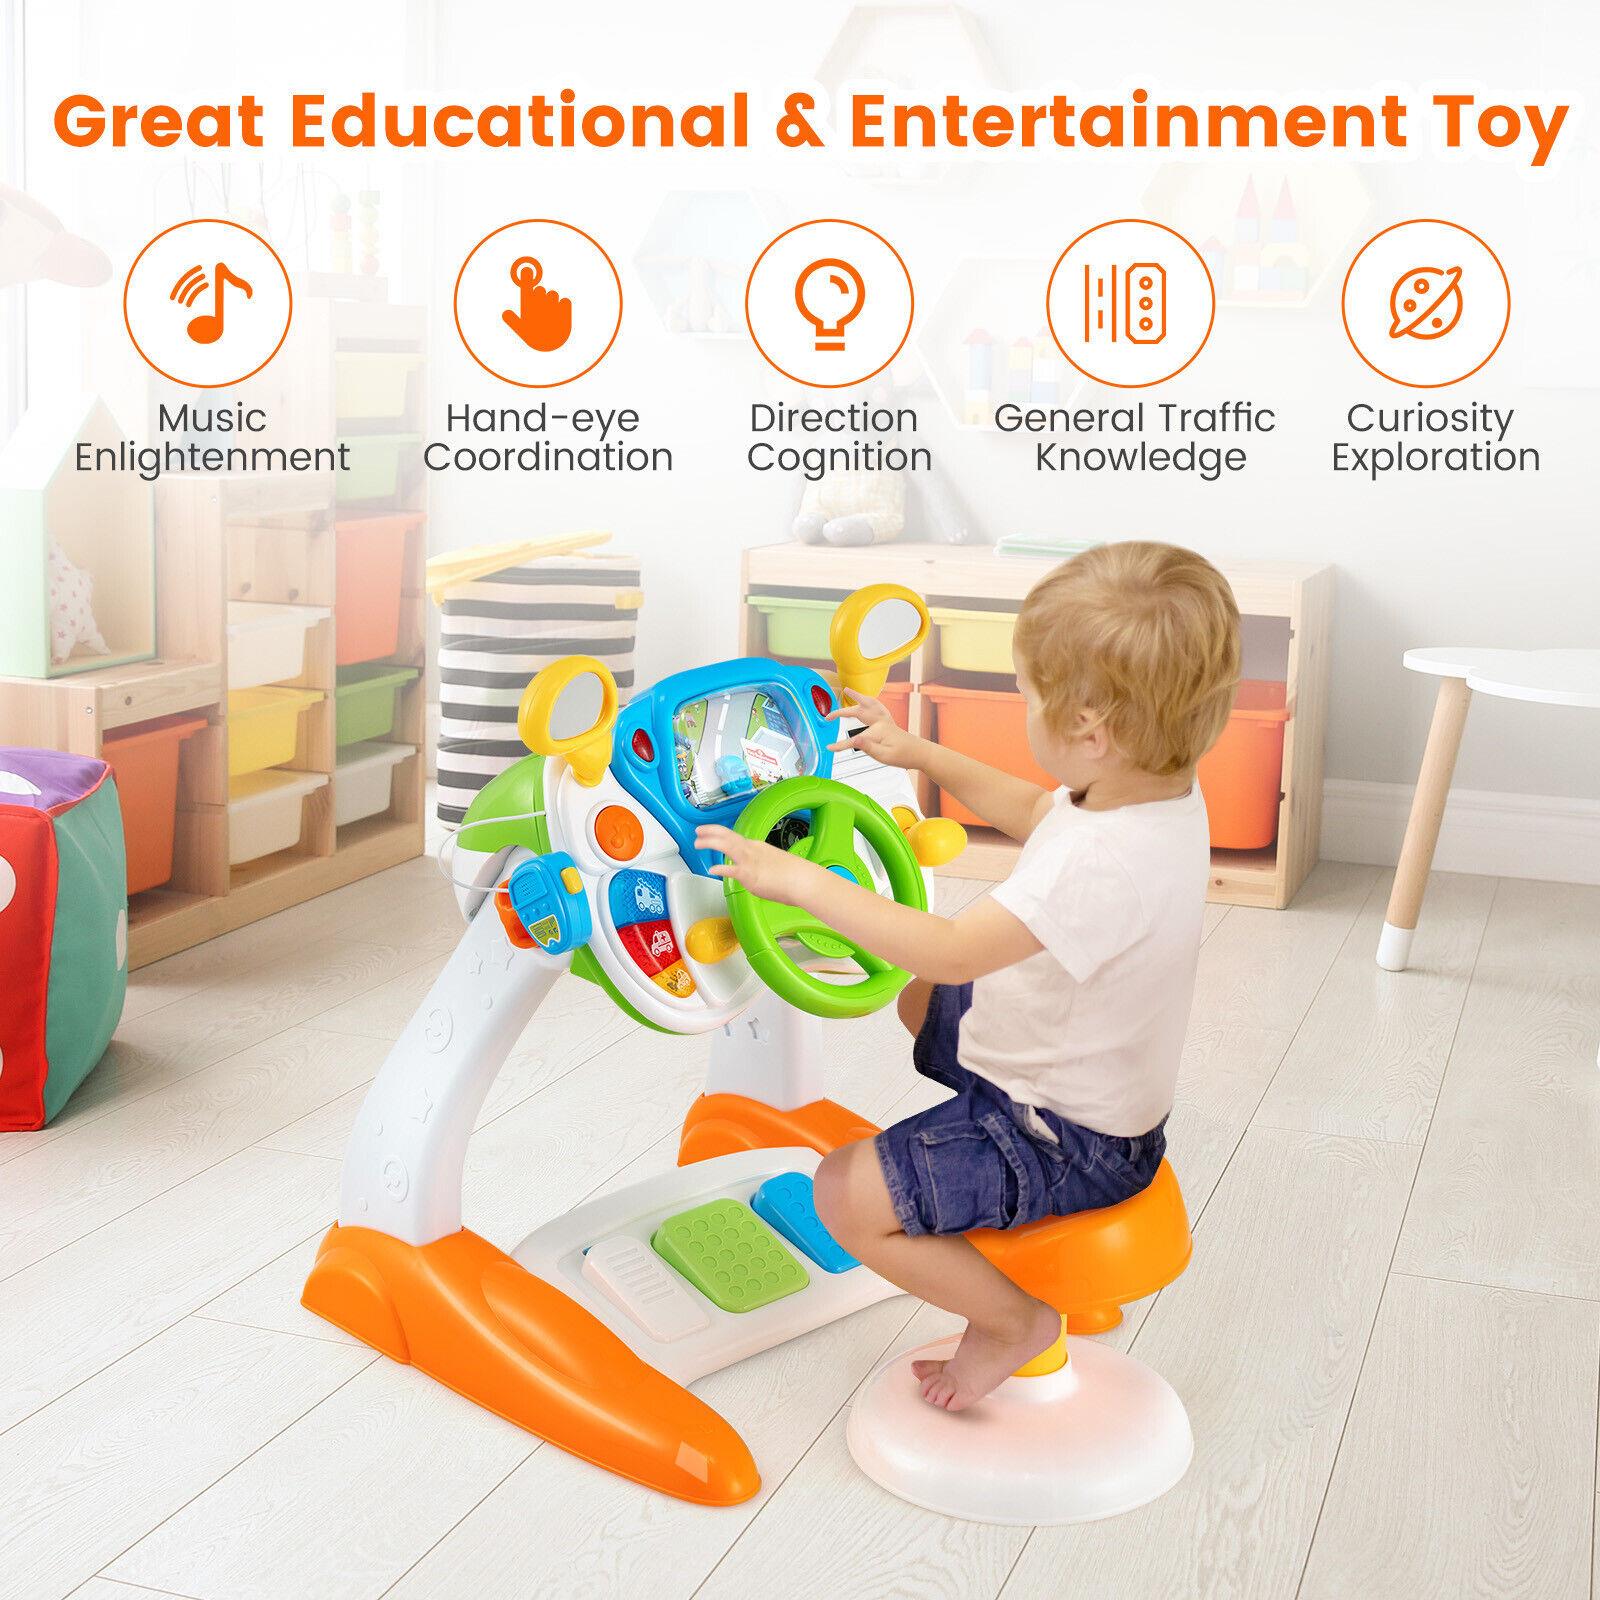 The Magic Toy Shop Kids Simulated Toy Freestanding Electronic Steering Wheel Driving Simulator Toy